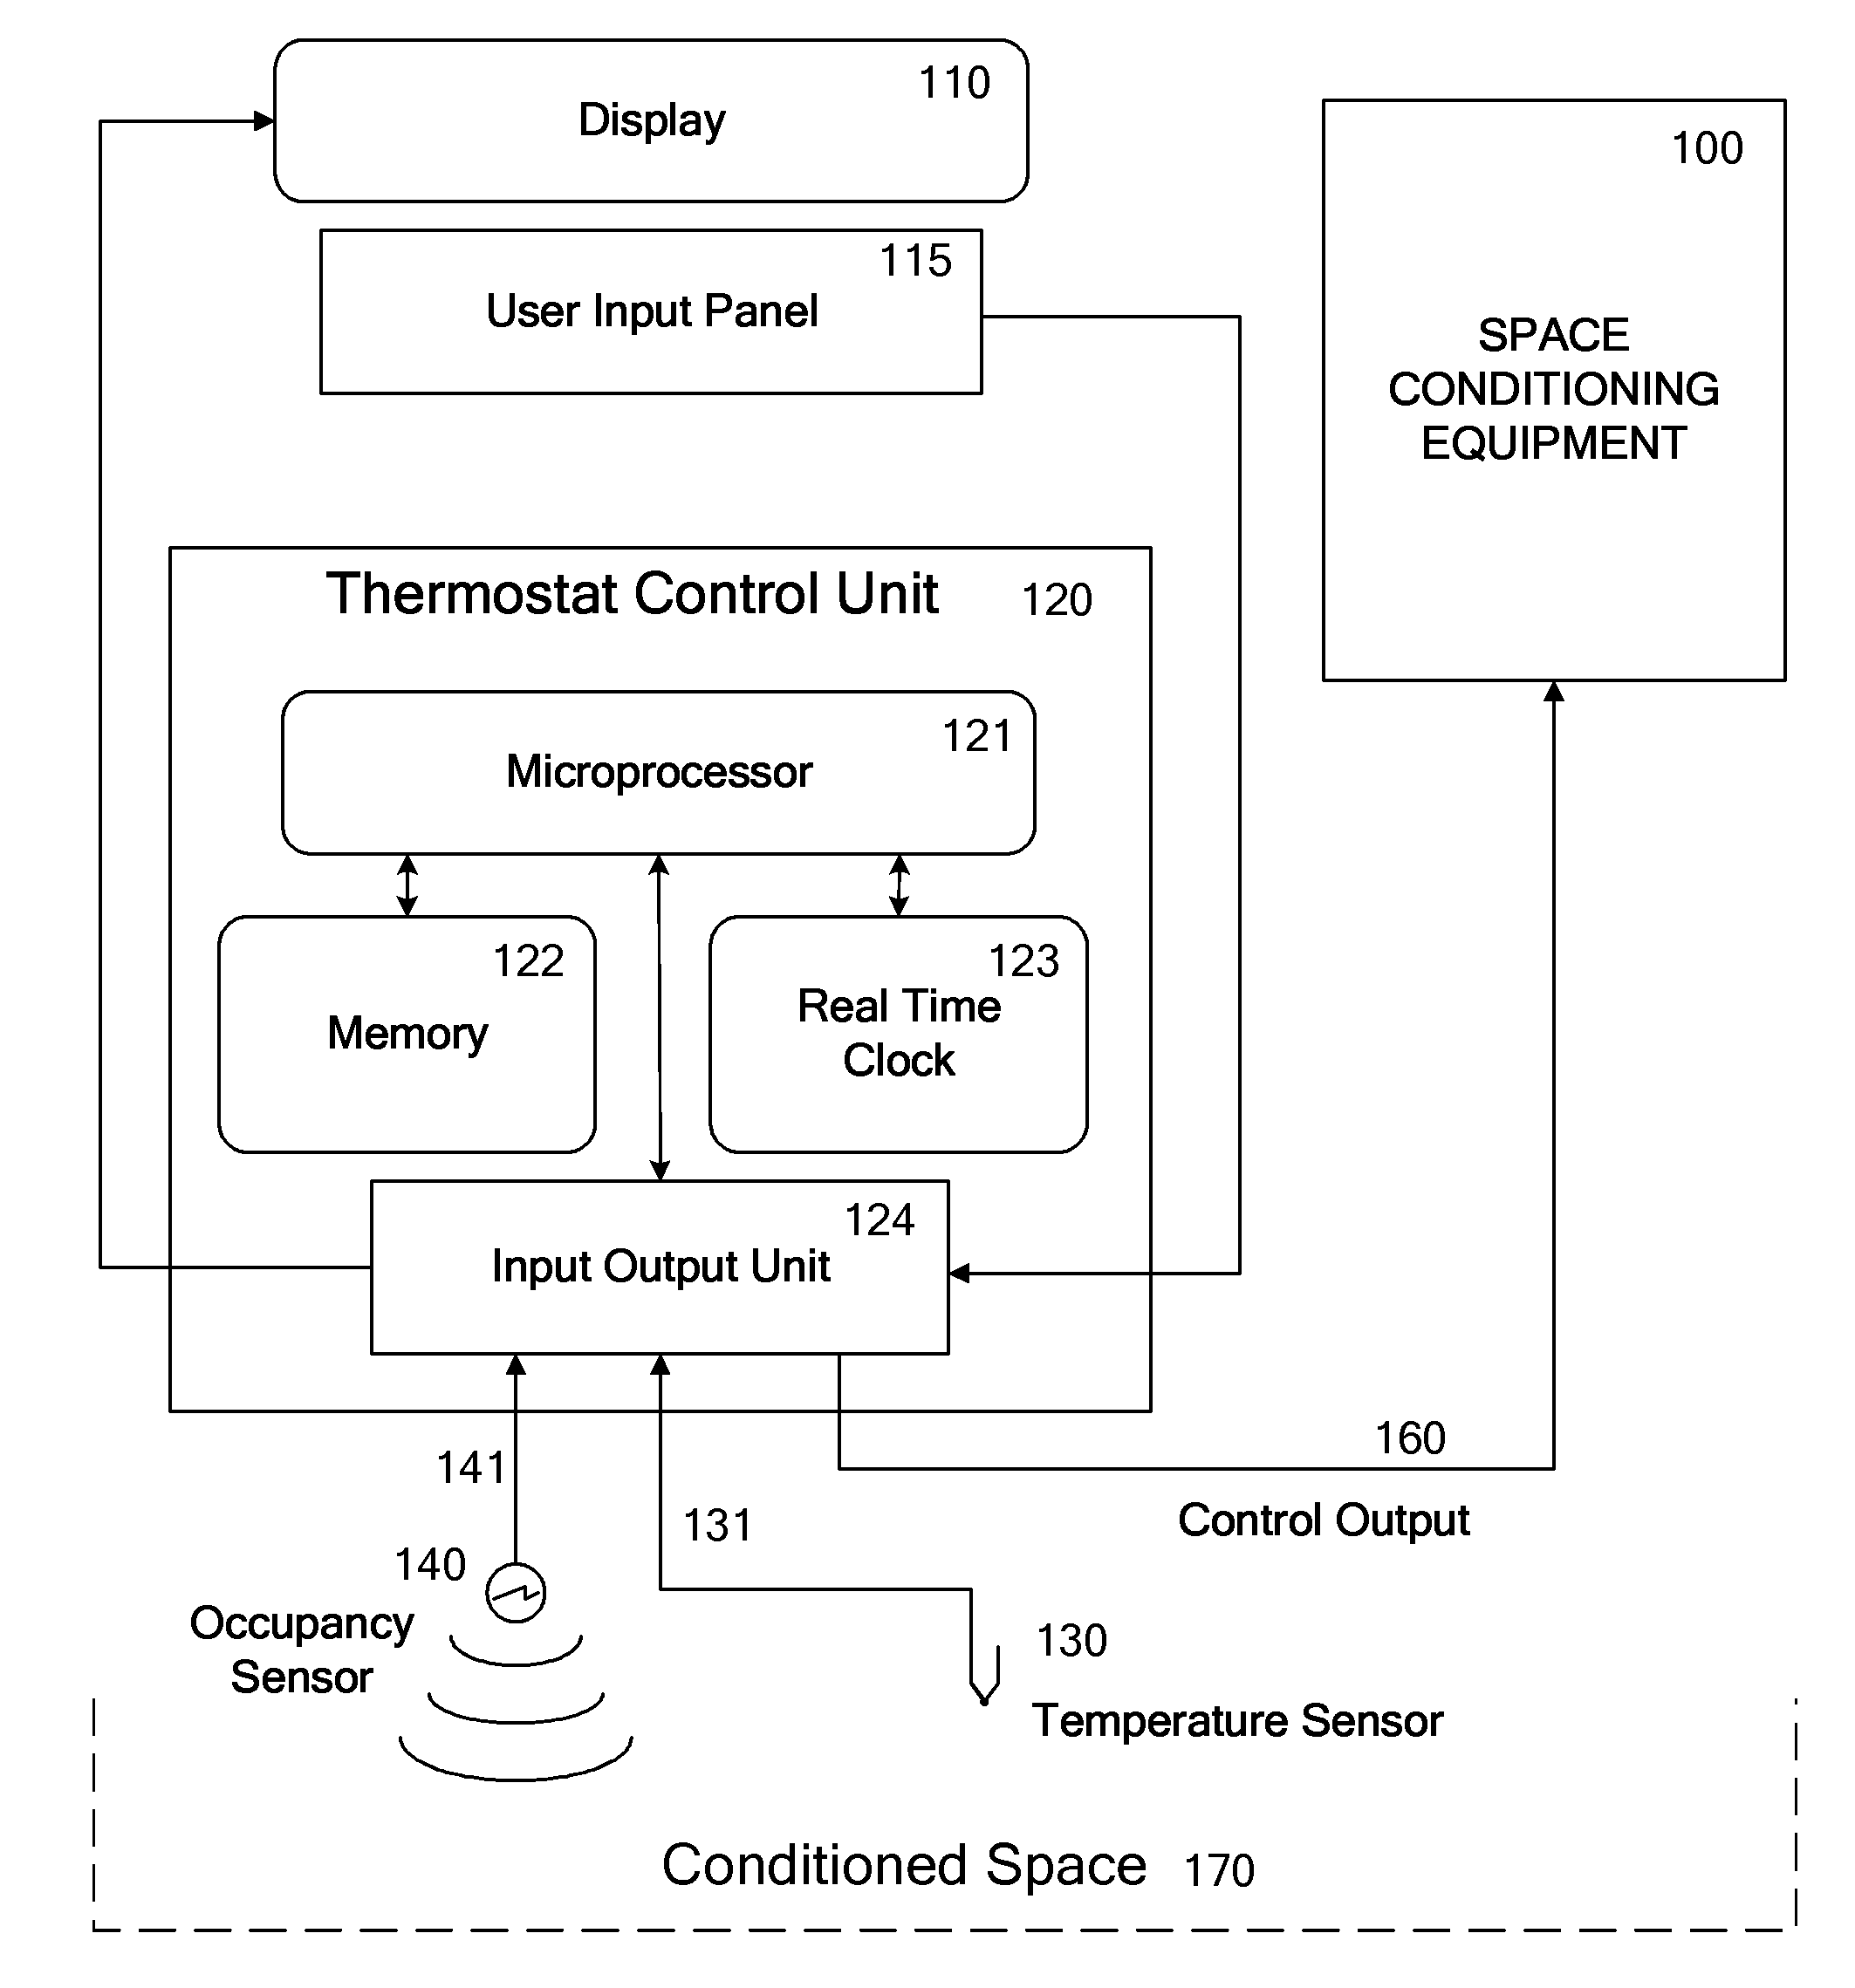 Override Of Nonoccupancy Status In a Thermostat Device Based Upon Analysis Of Recent Patterns Of Occupancy